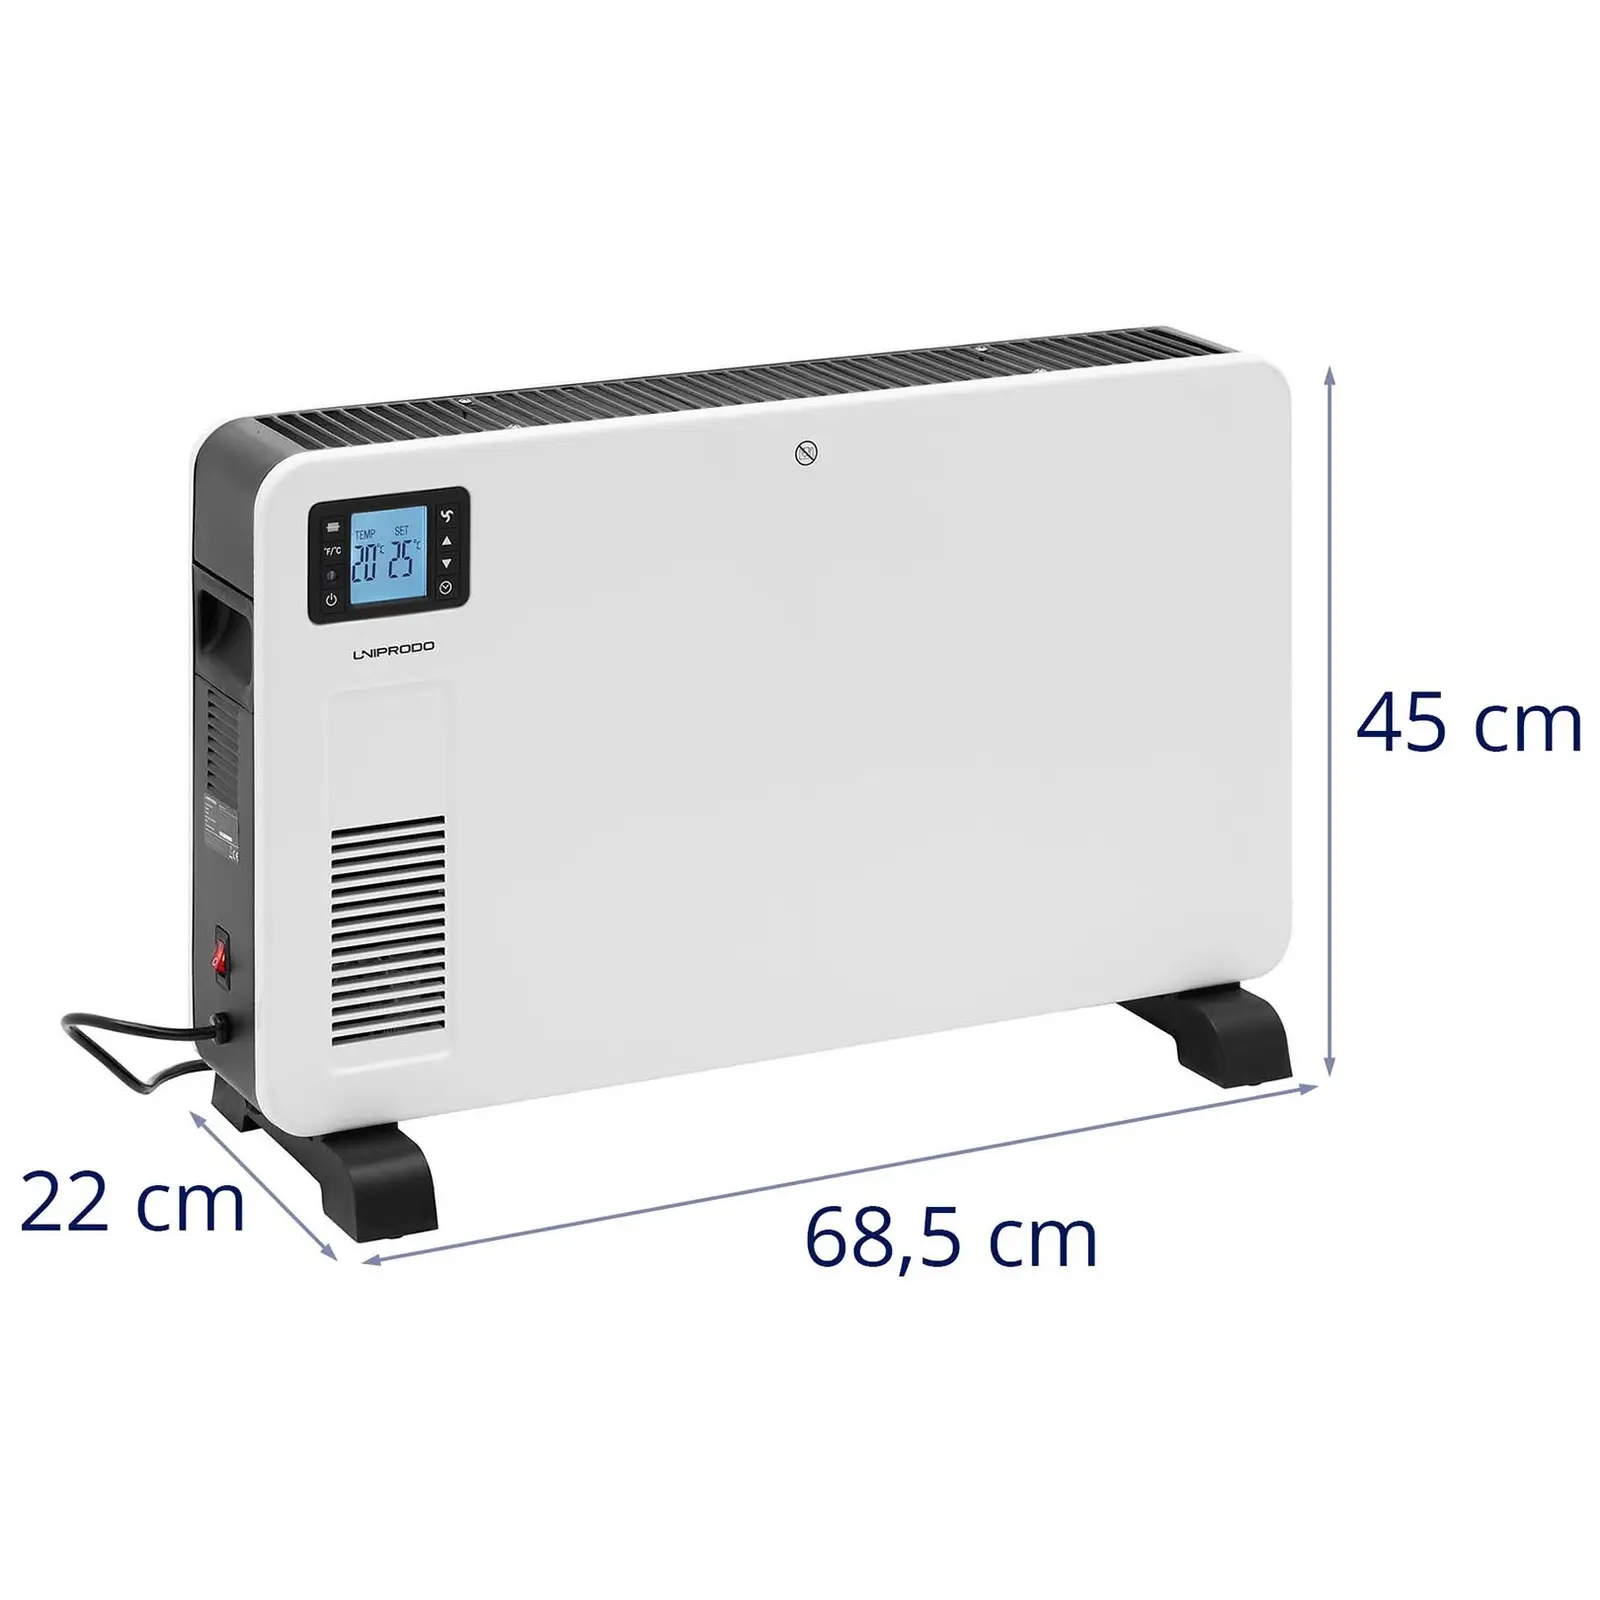 Convector Heater - for 25 m² - 2300 W - timer - LCD - remote control